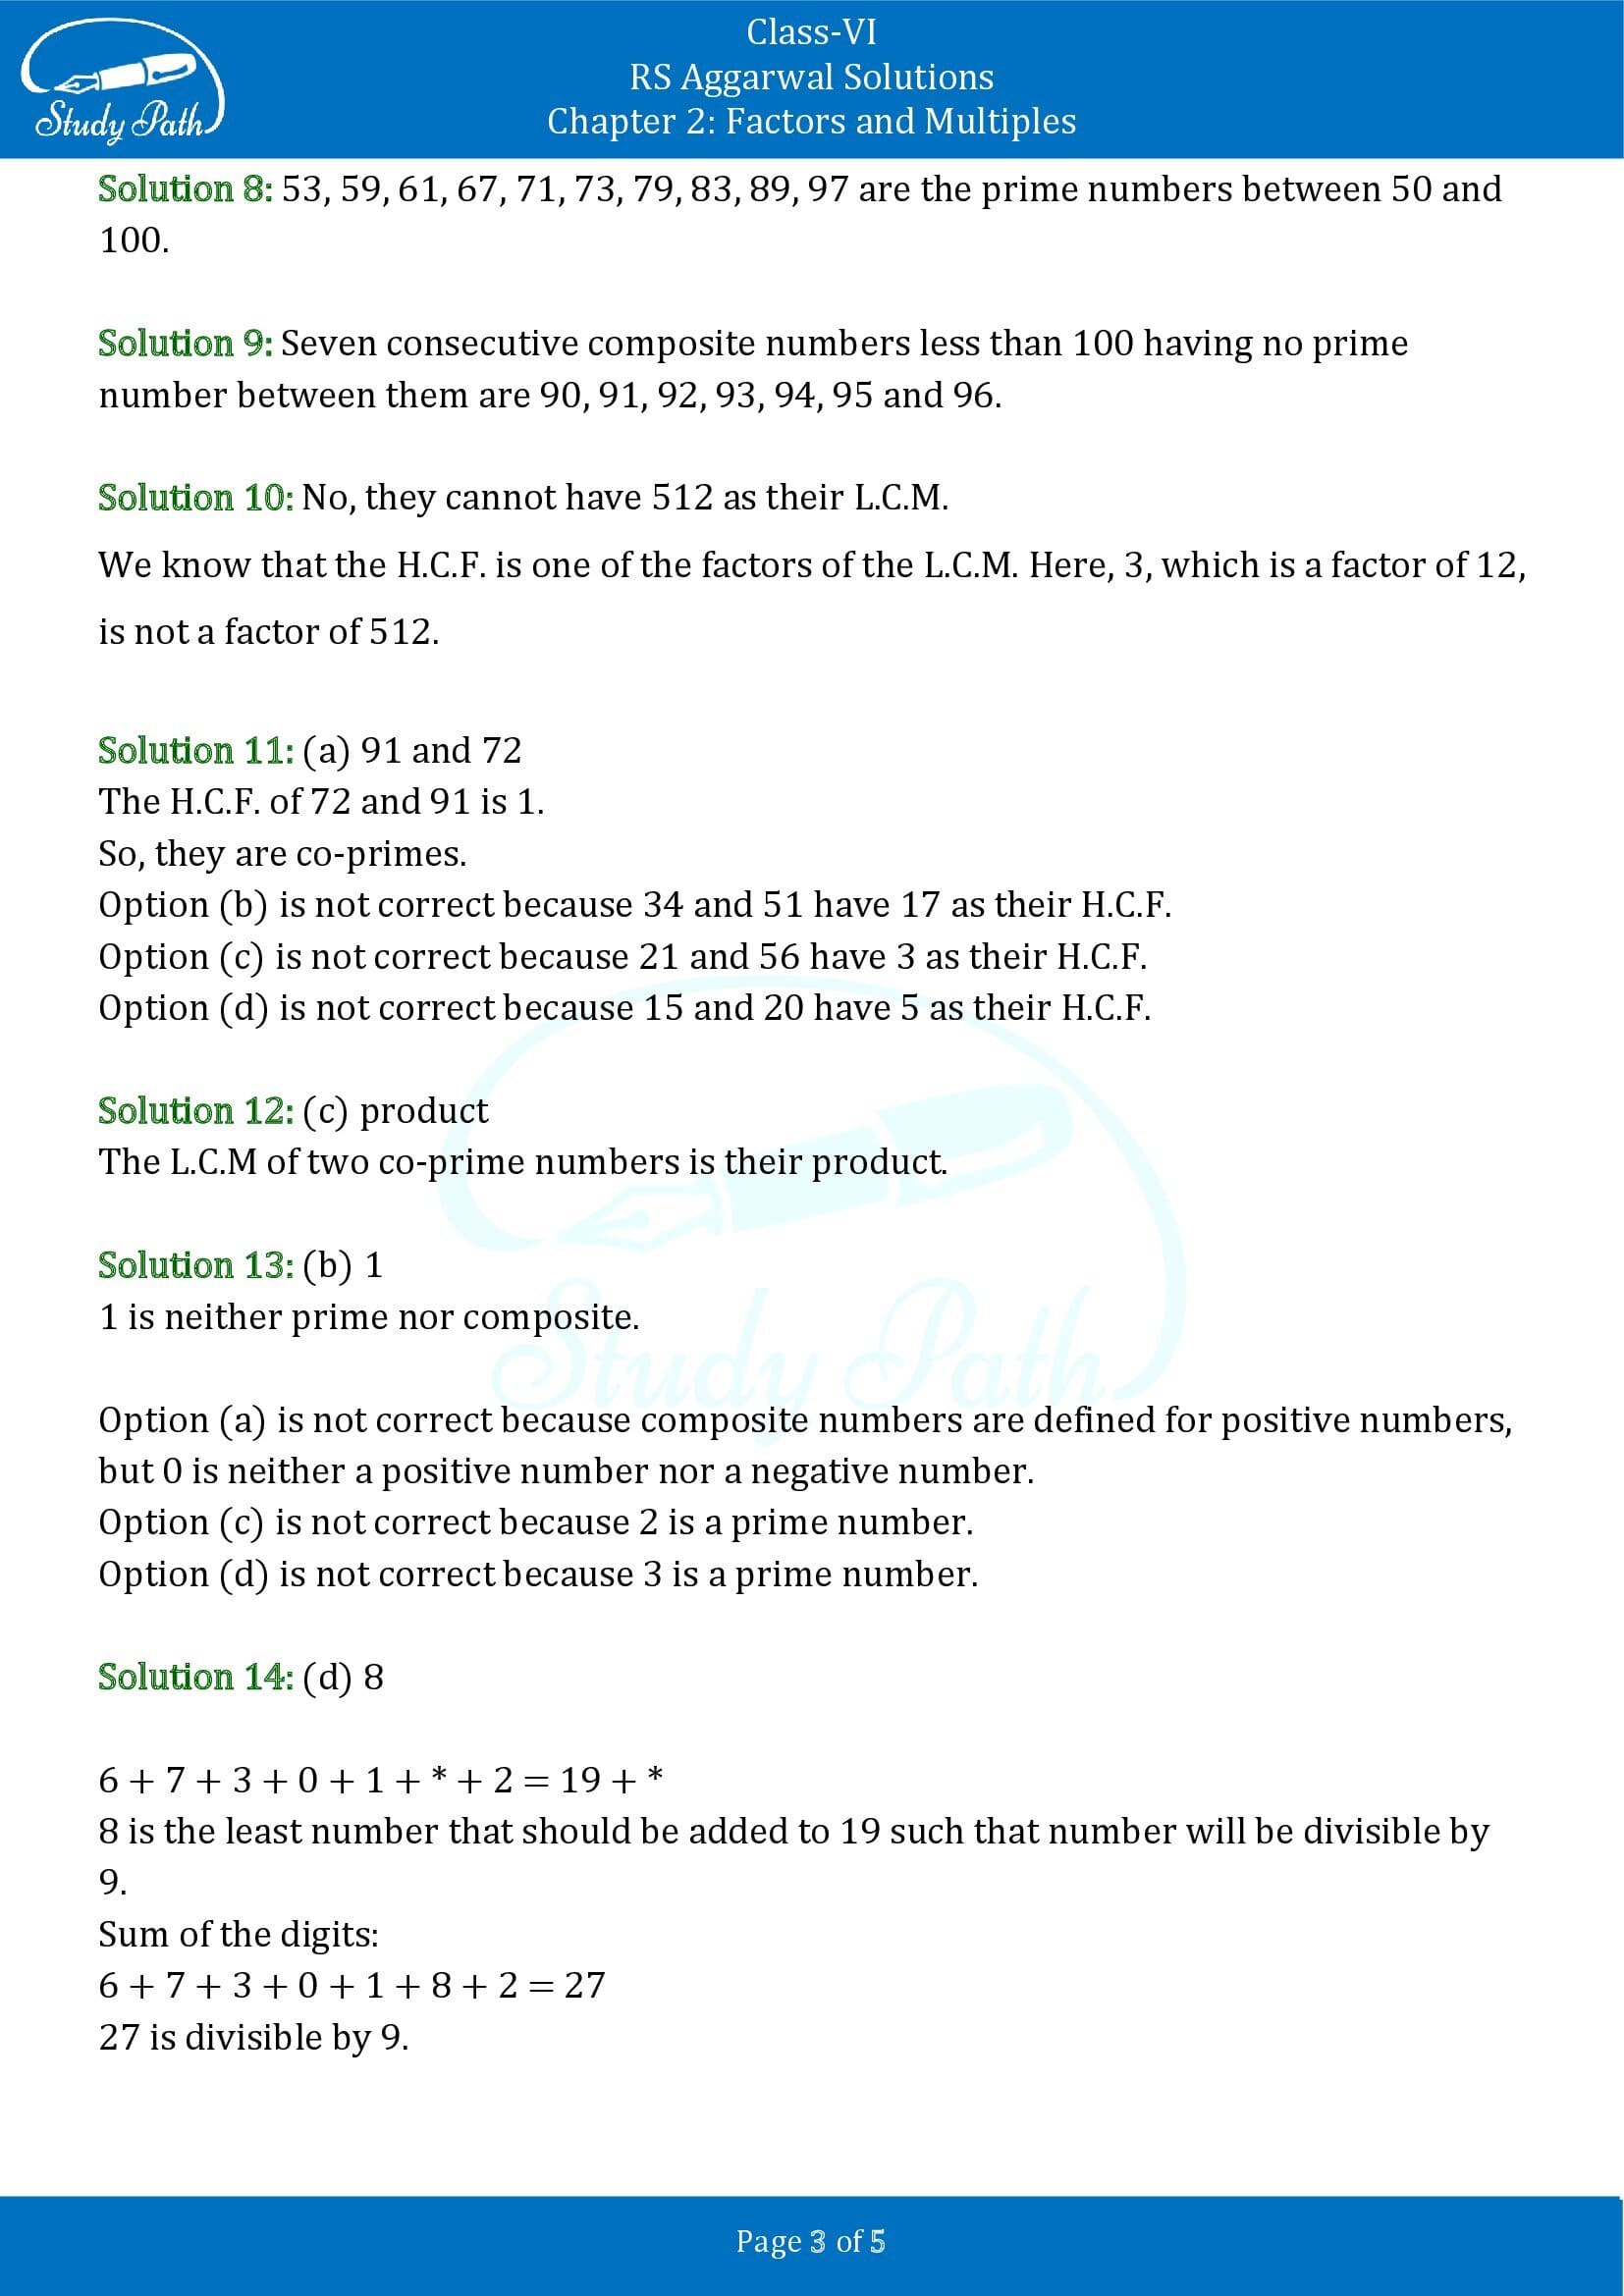 RS Aggarwal Solutions Class 6 Chapter 2 Factors and Multiples Test Paper 00003